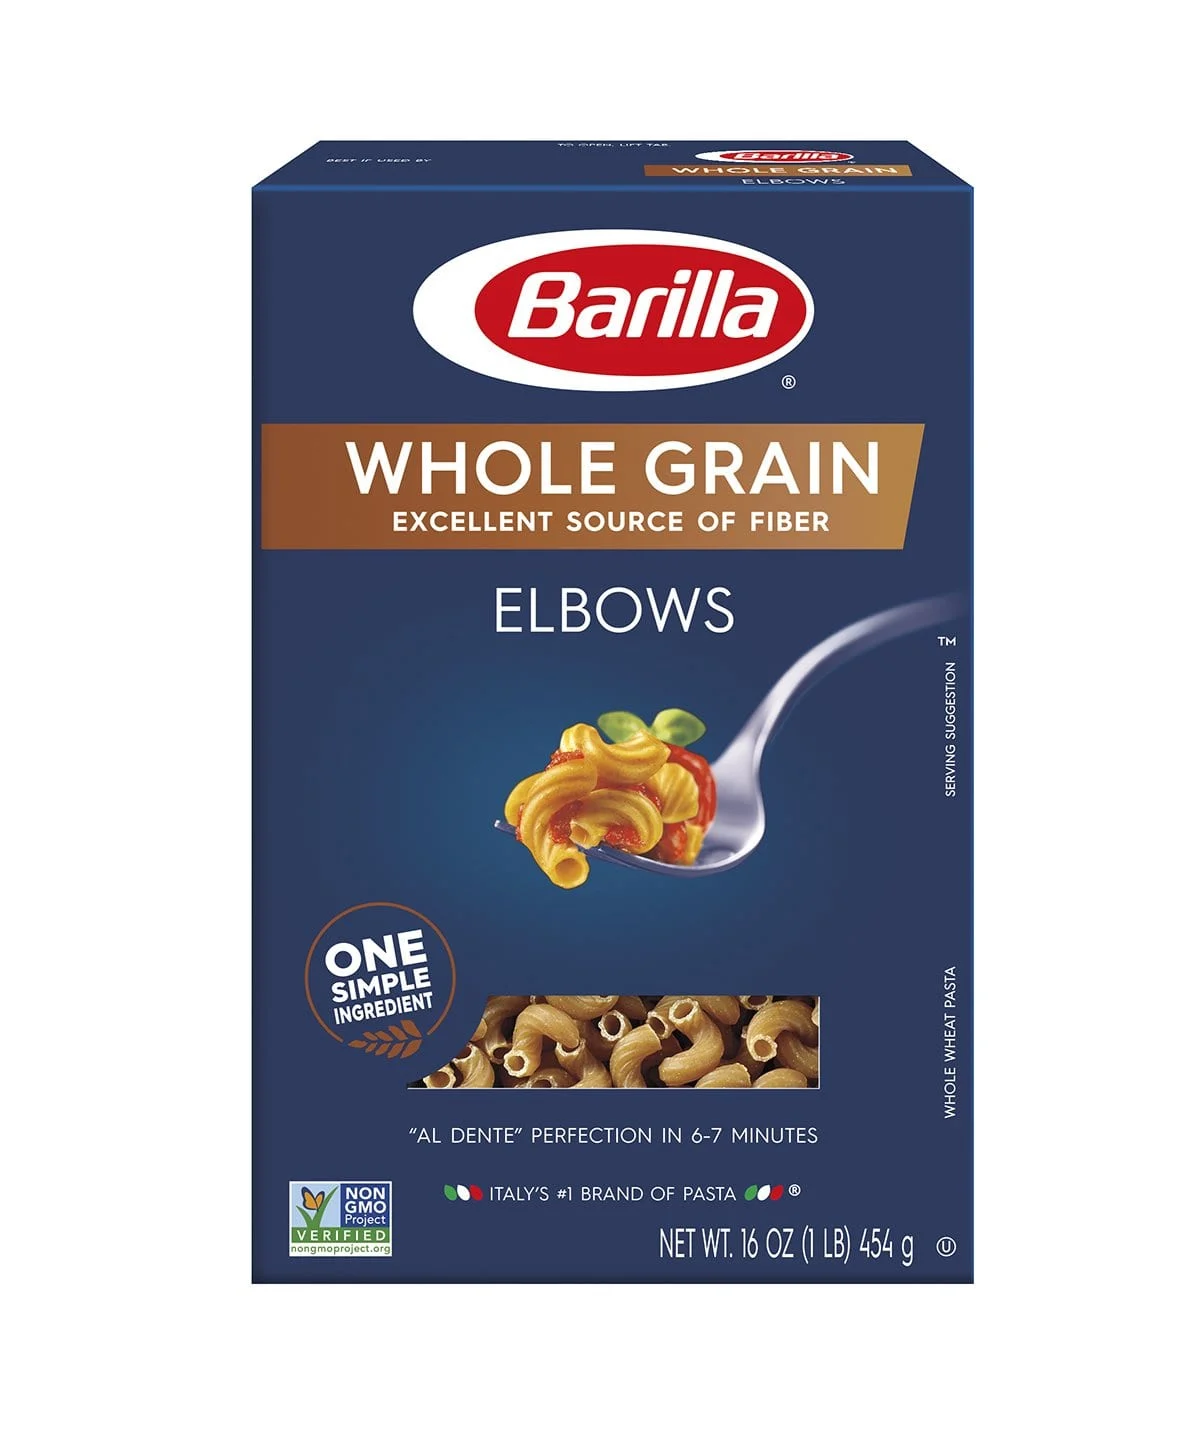 Barilla Whole Grain Pasta, Elbows, 16 Ounce (Pack of 8)